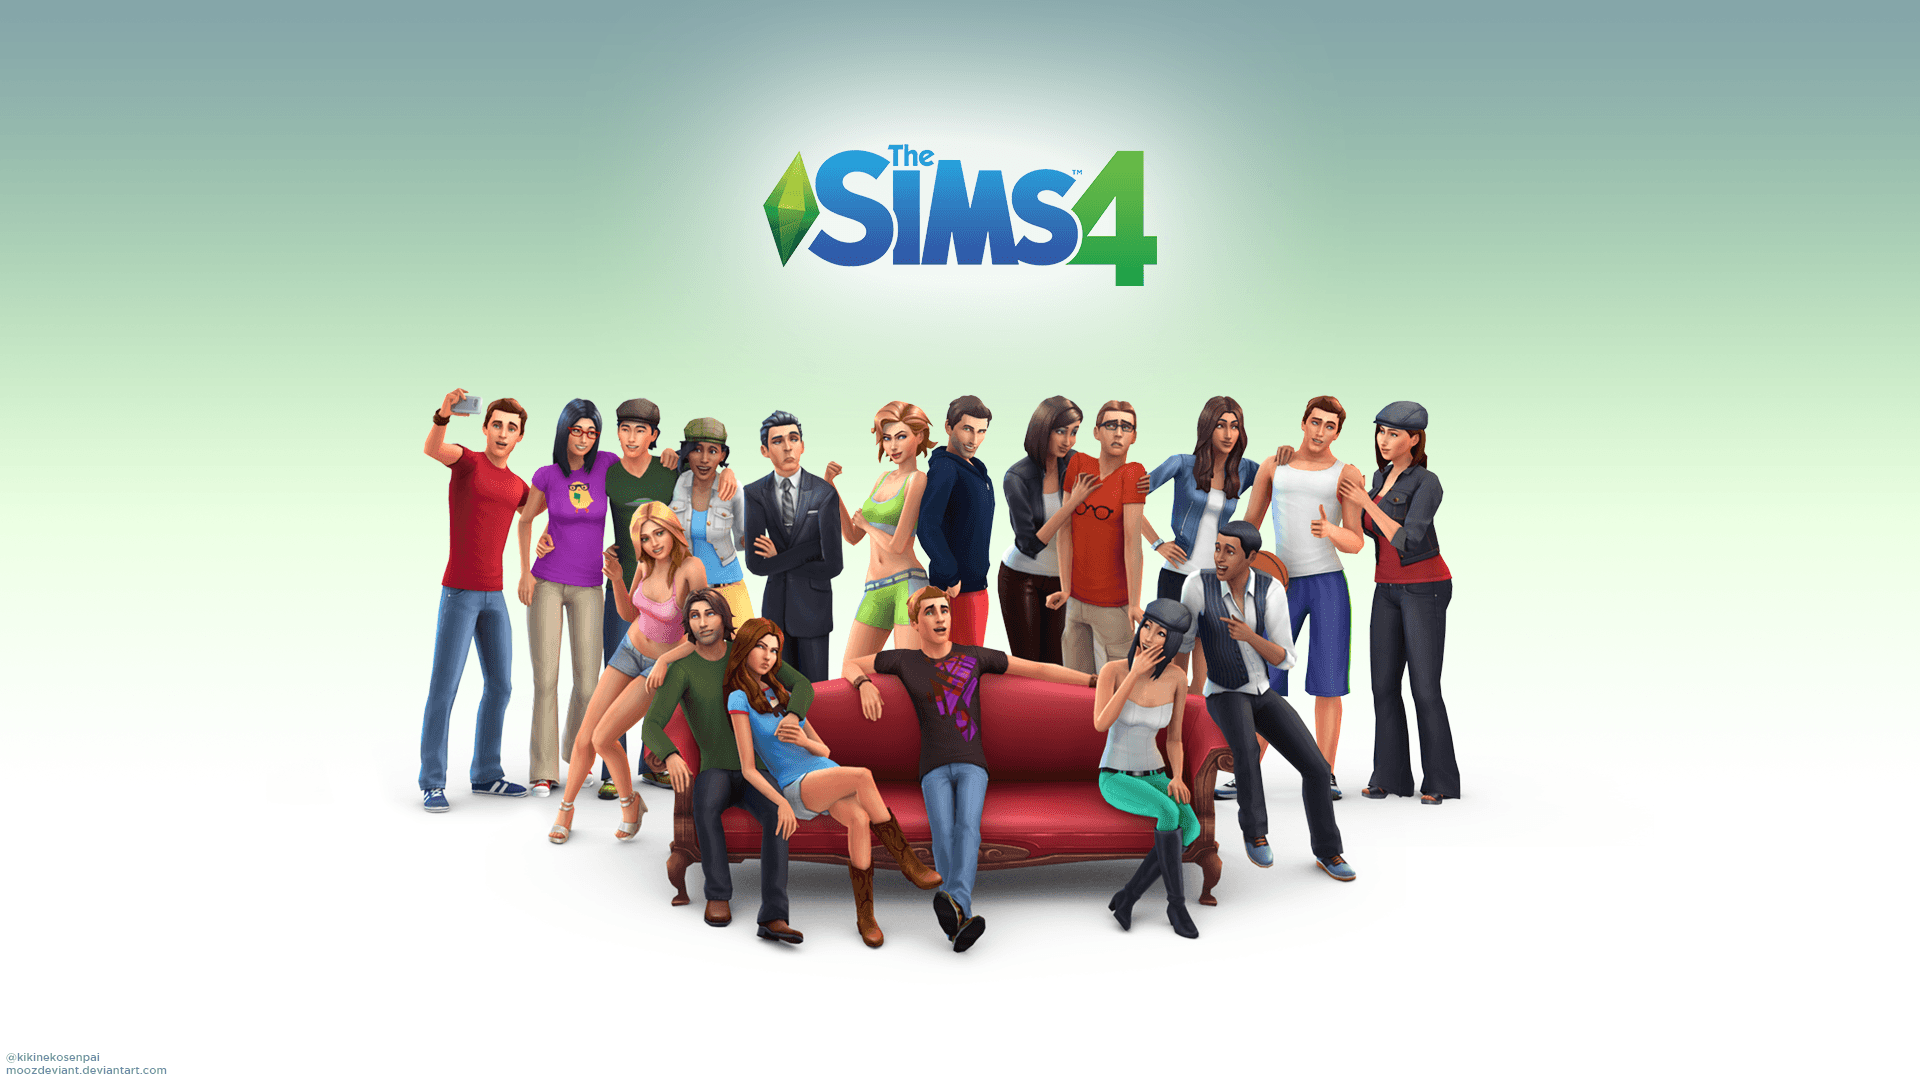 The Sims 4 Wallpaper High Resolution and Quality Download